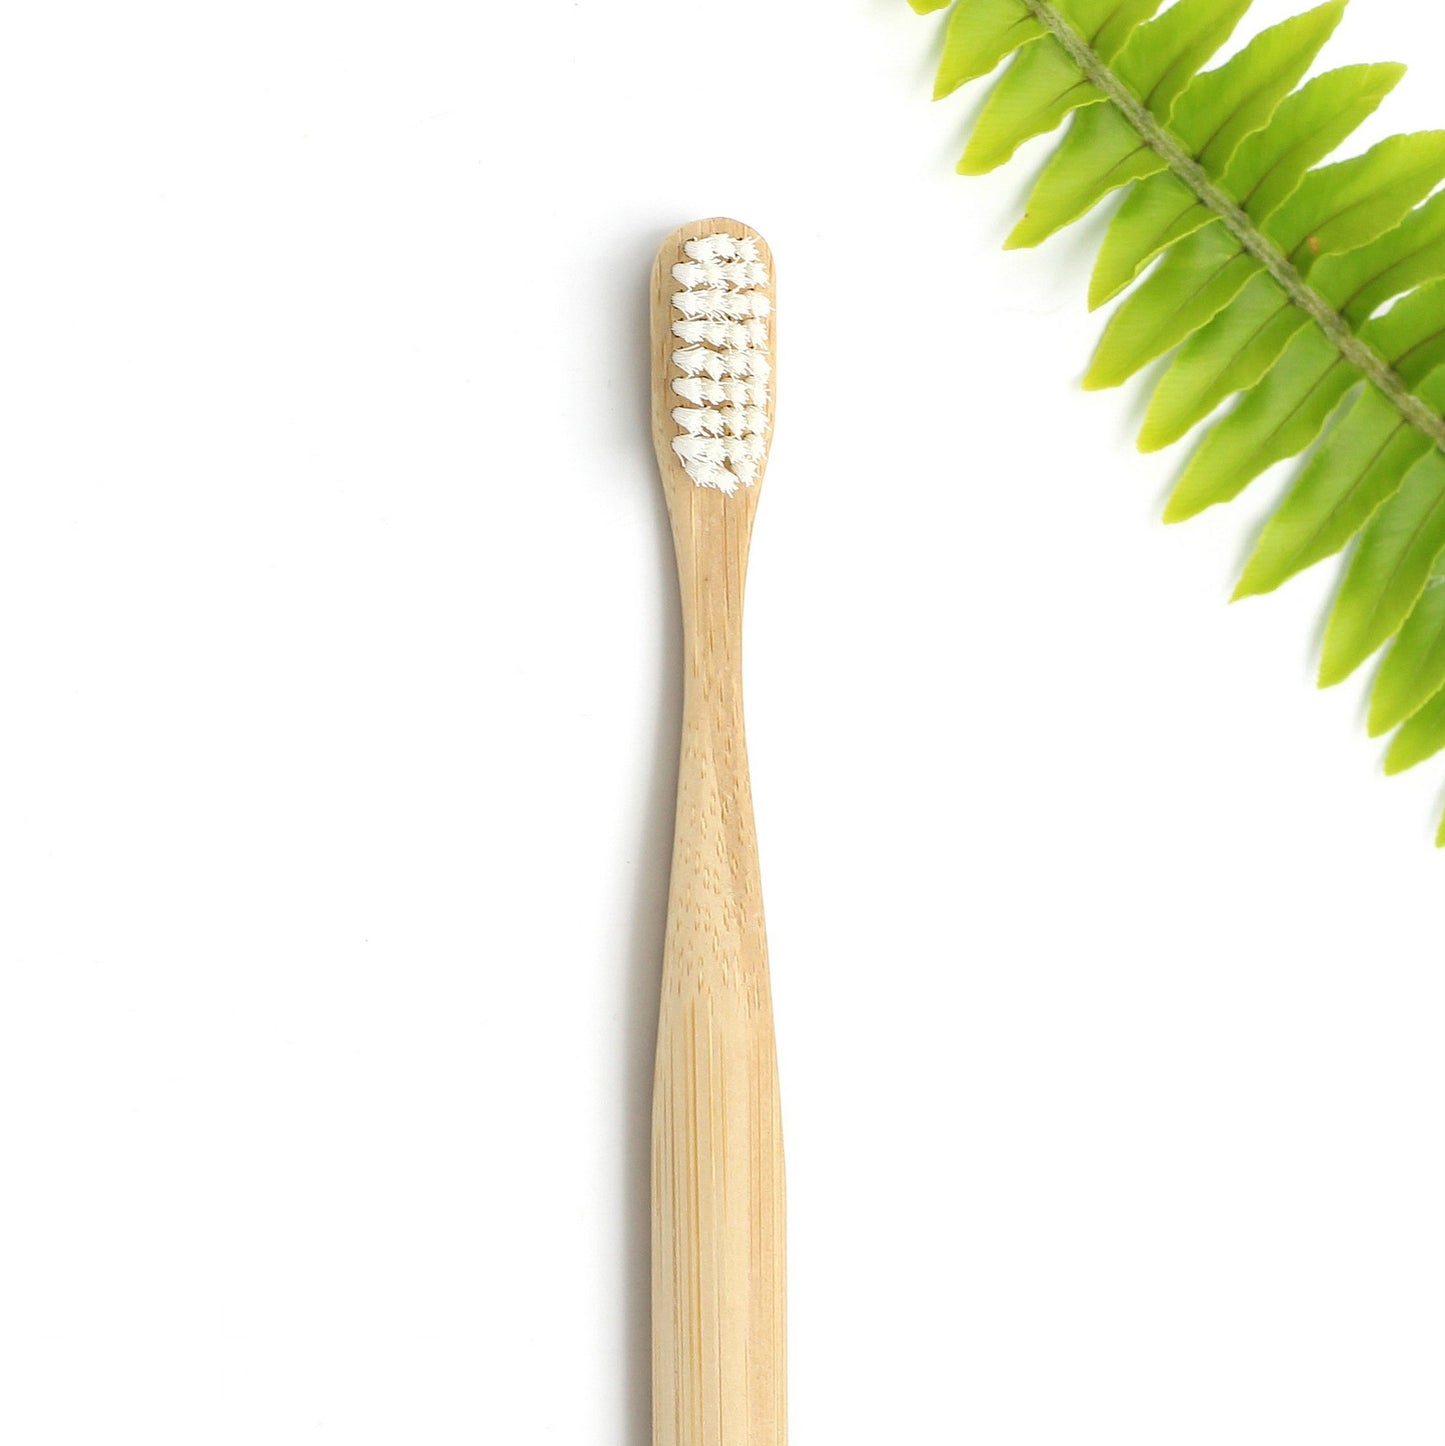 #BAMBOO Toothbrush - Adult